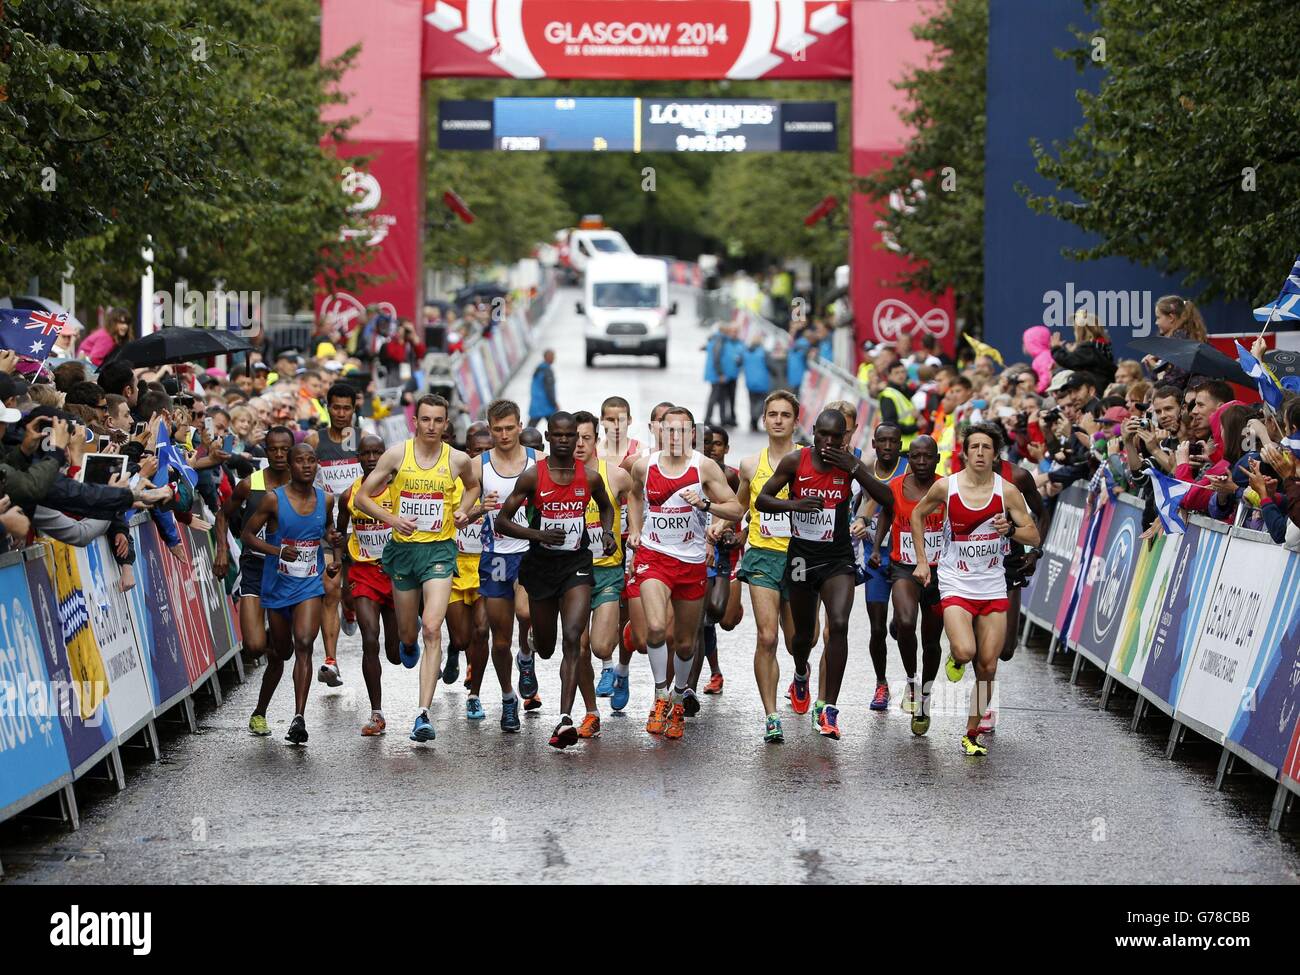 Sport - 2014 Commonwealth Games - Day Four. The Men's marathon gets underway during the 2014 Commonwealth Games in Glasgow. Stock Photo